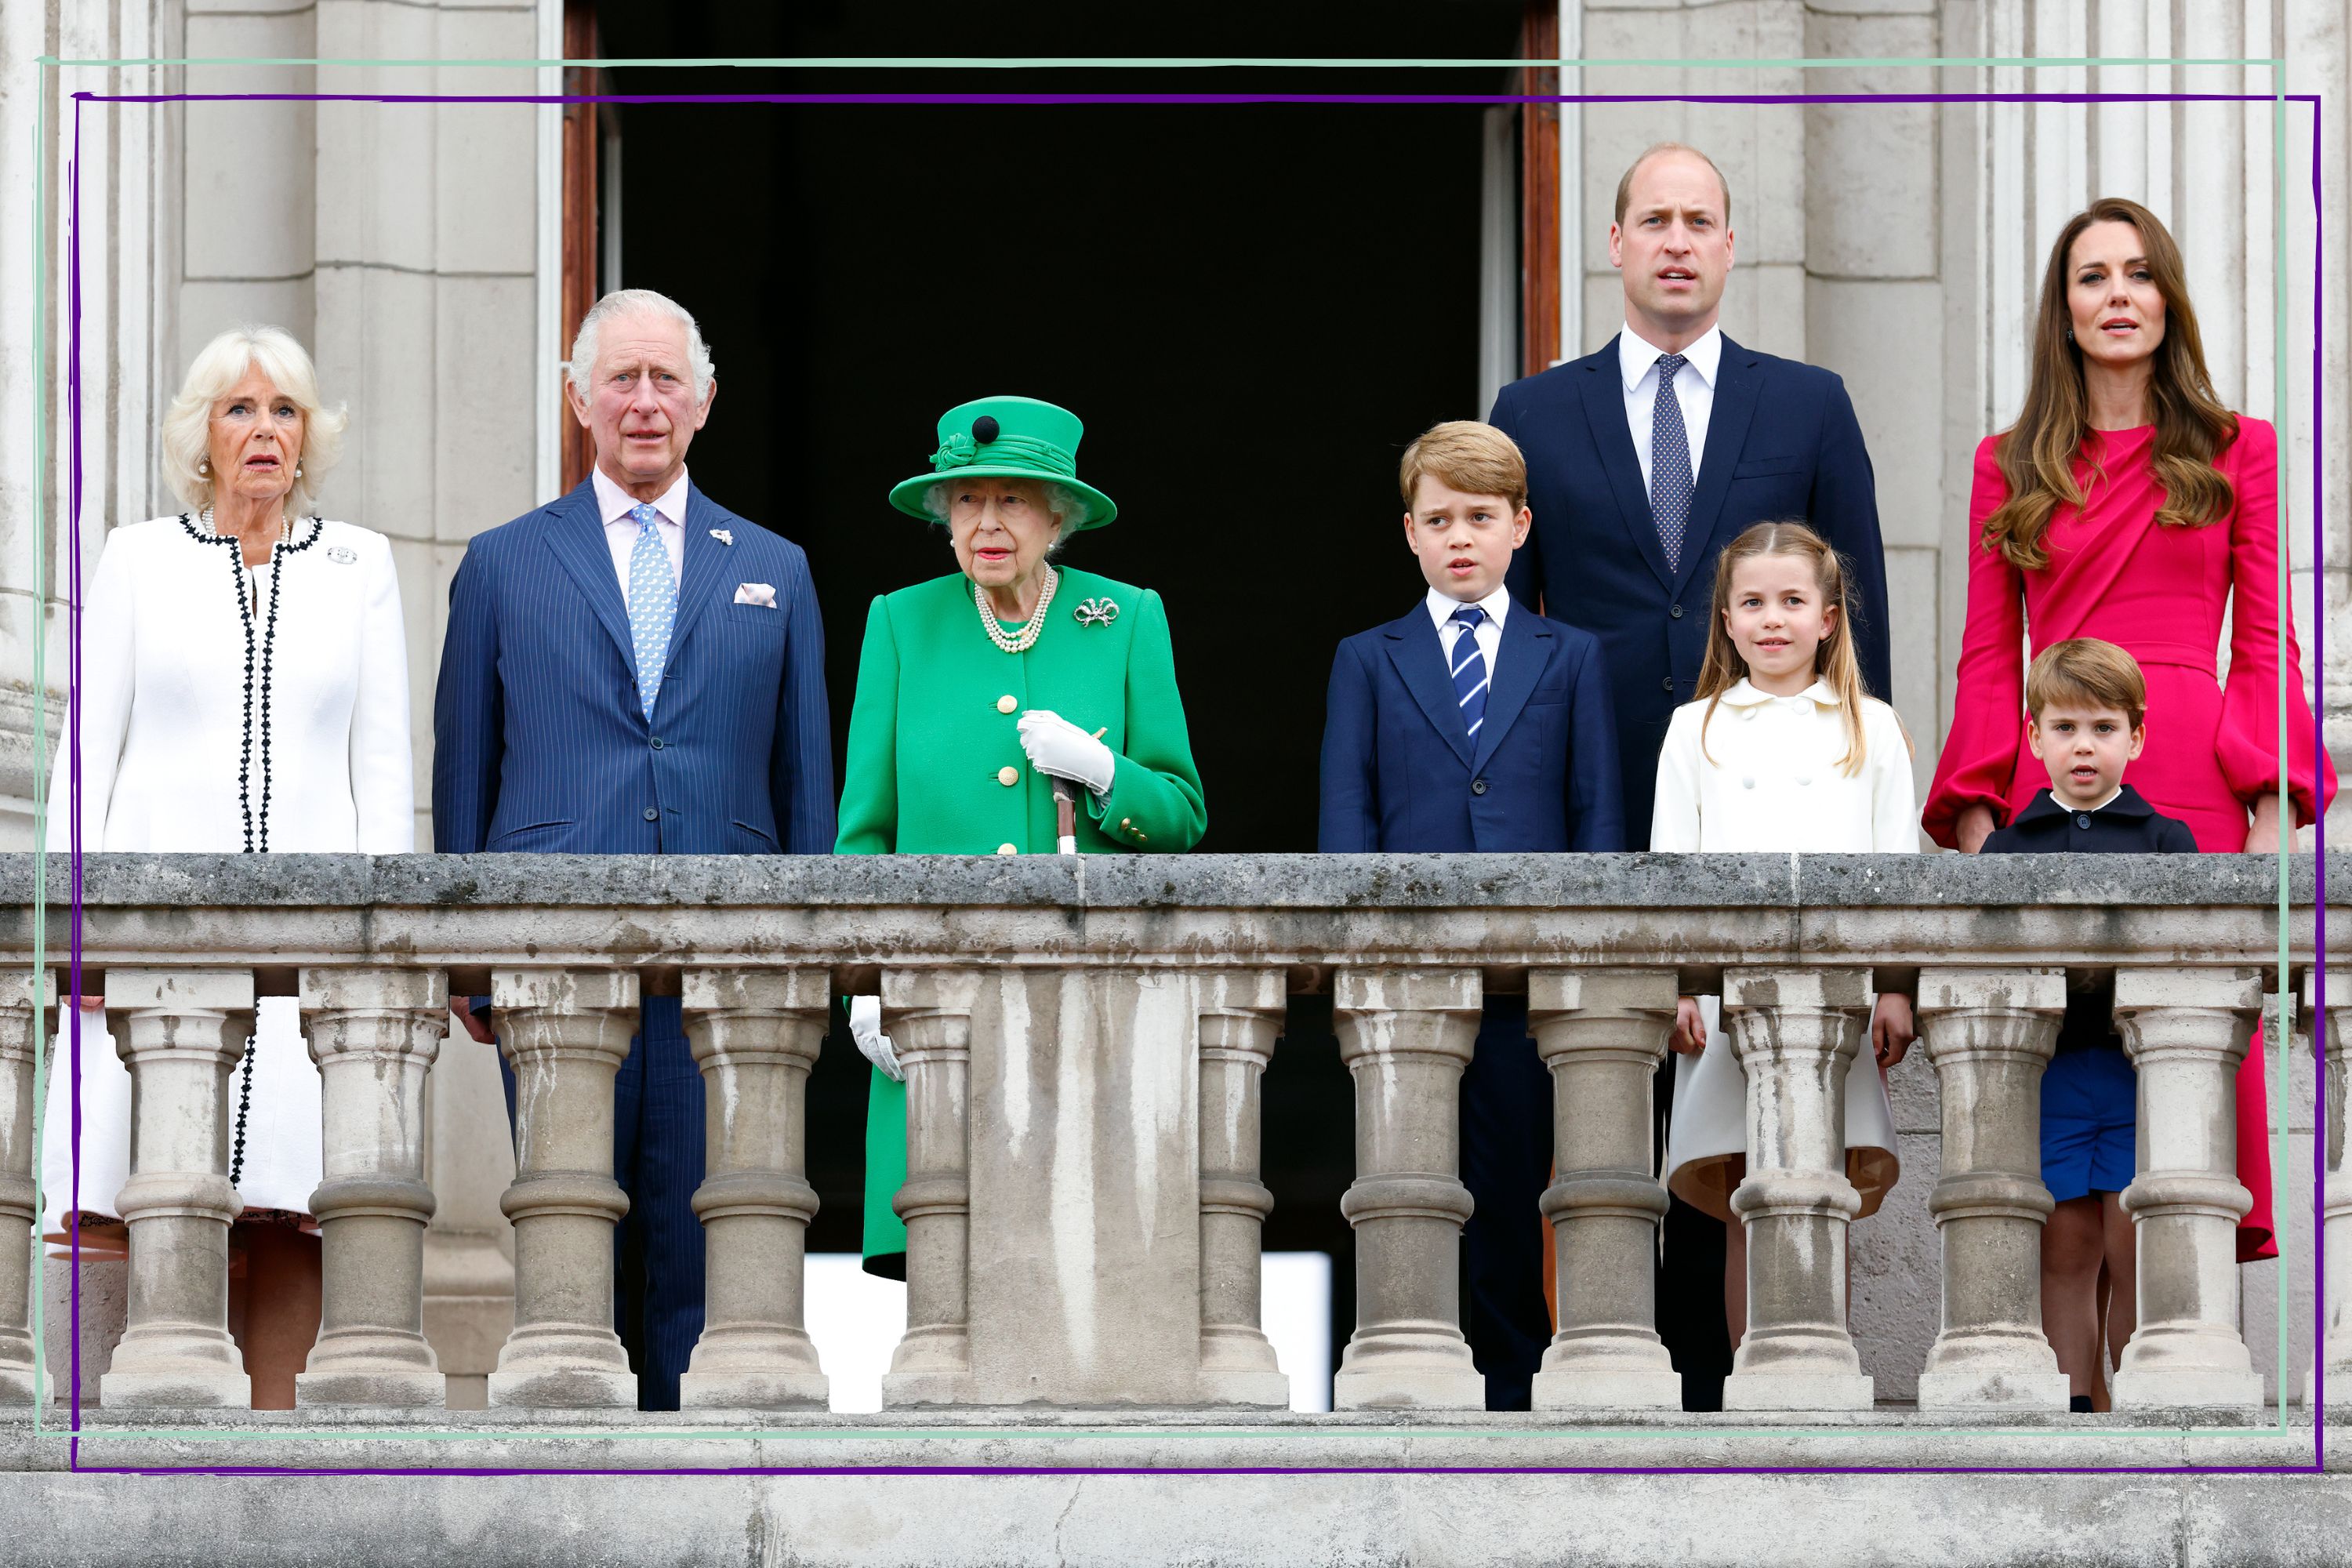 With the death of Queen Elizabeth II, her son Charles becomes